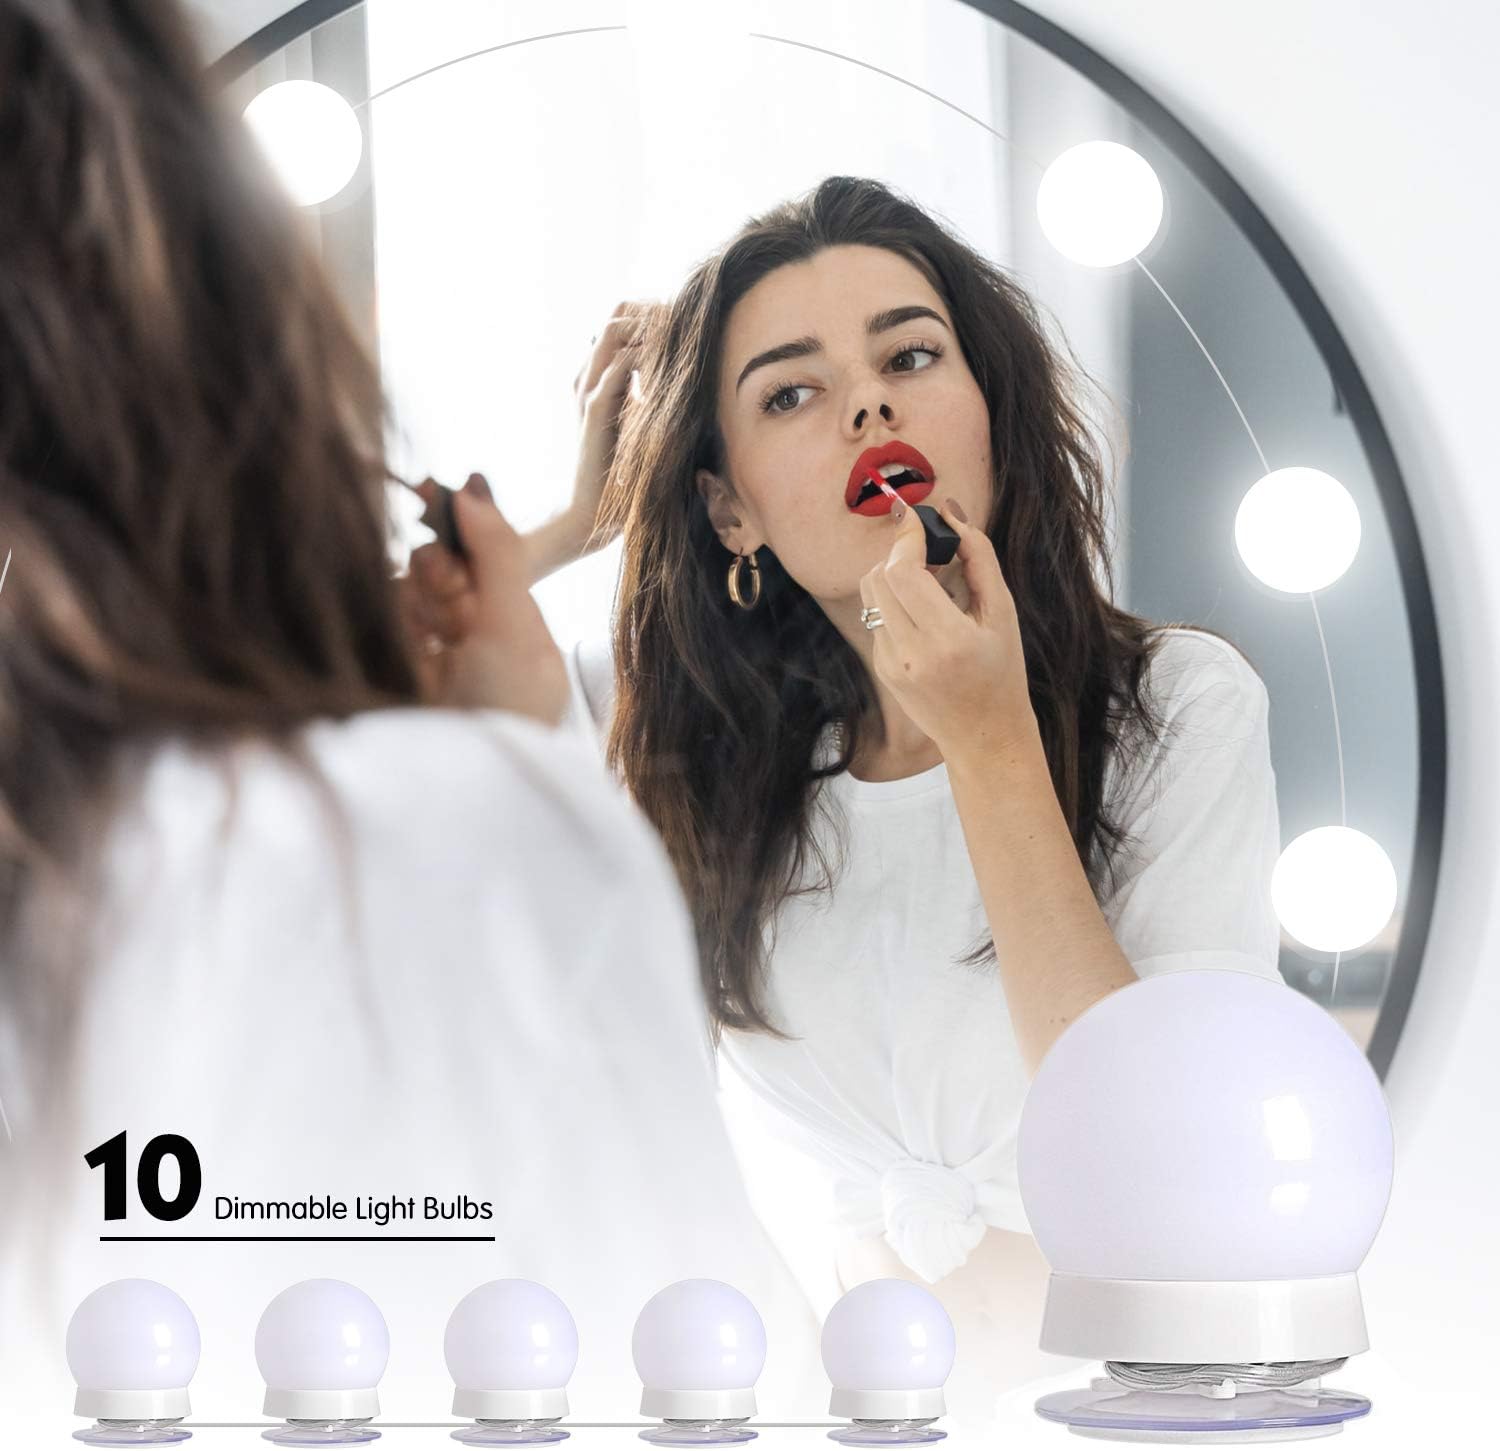 Brightown Upgraded Hollywood Style Vanity Mirror Lights Kit, 10 Dimmable Led Bulbs with 3 Color Modes, Best for Makeup Dressing Table Bat